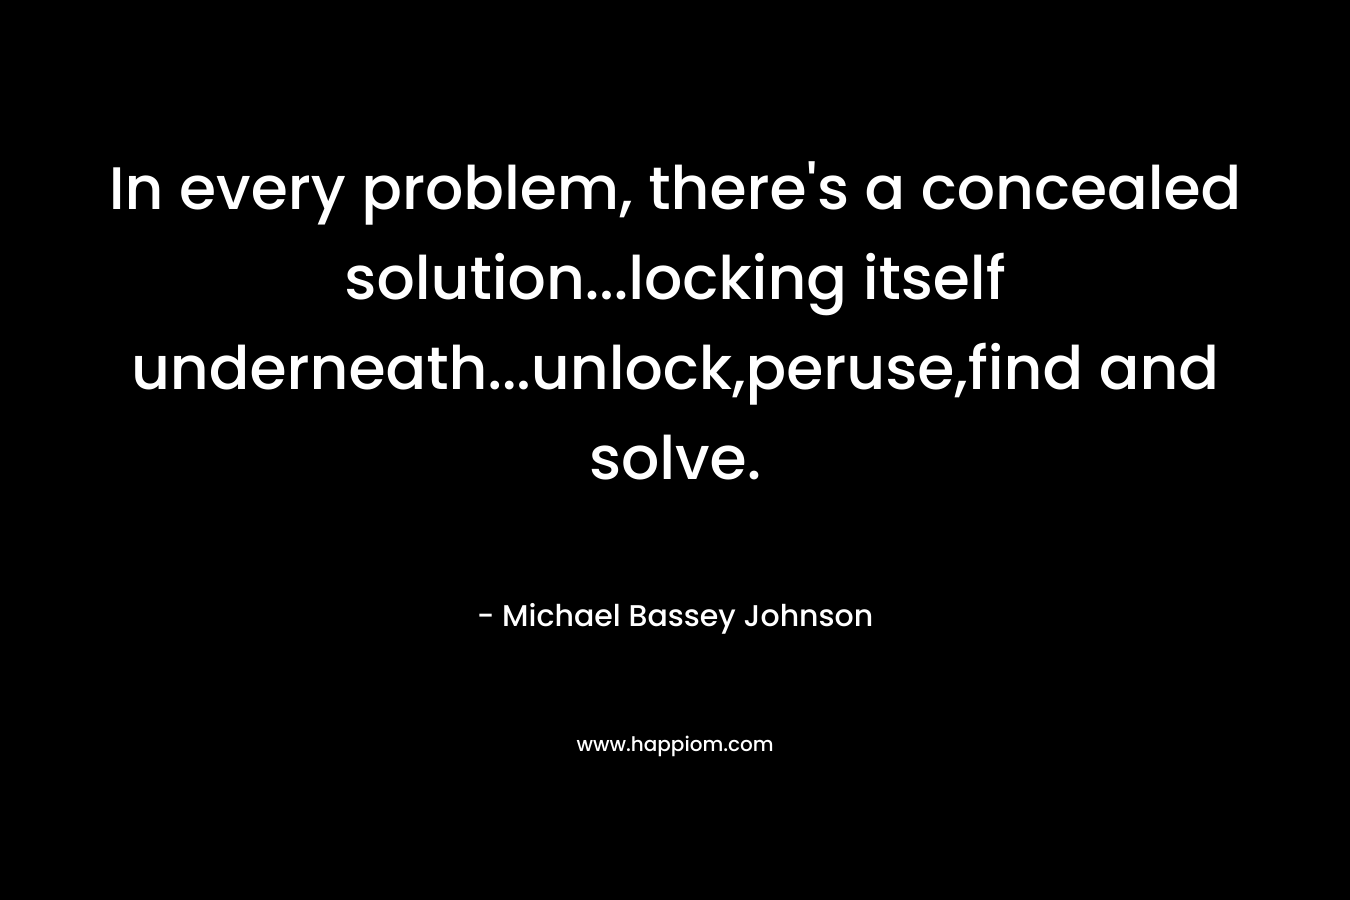 In every problem, there's a concealed solution...locking itself underneath...unlock,peruse,find and solve.